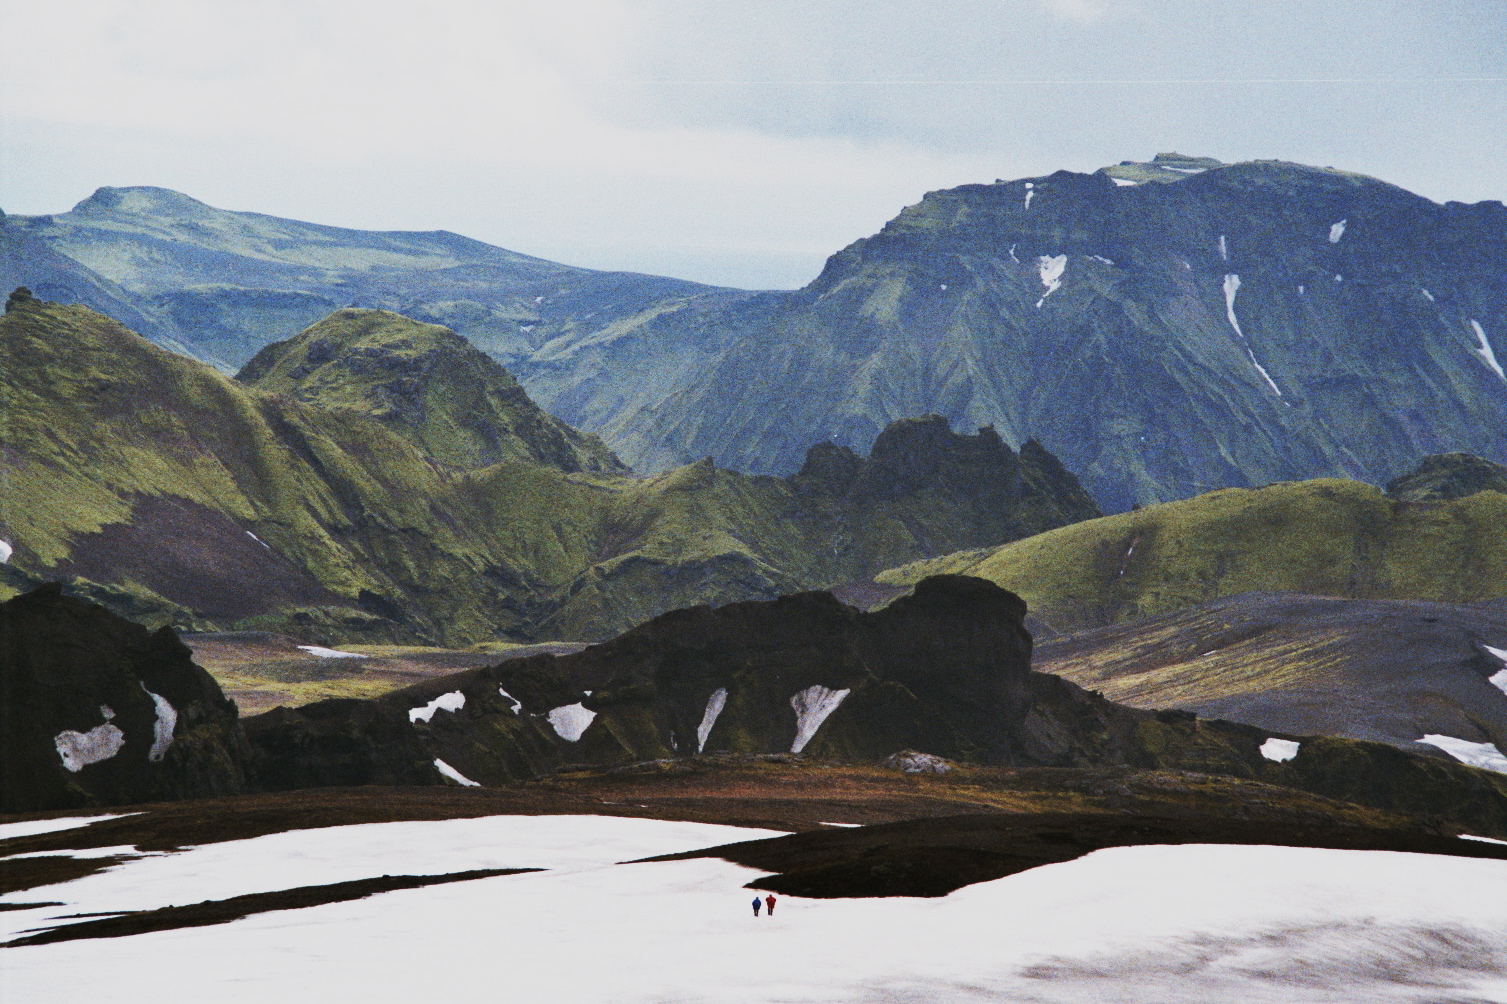 Two people walking in the snowy mountains of Iceland.